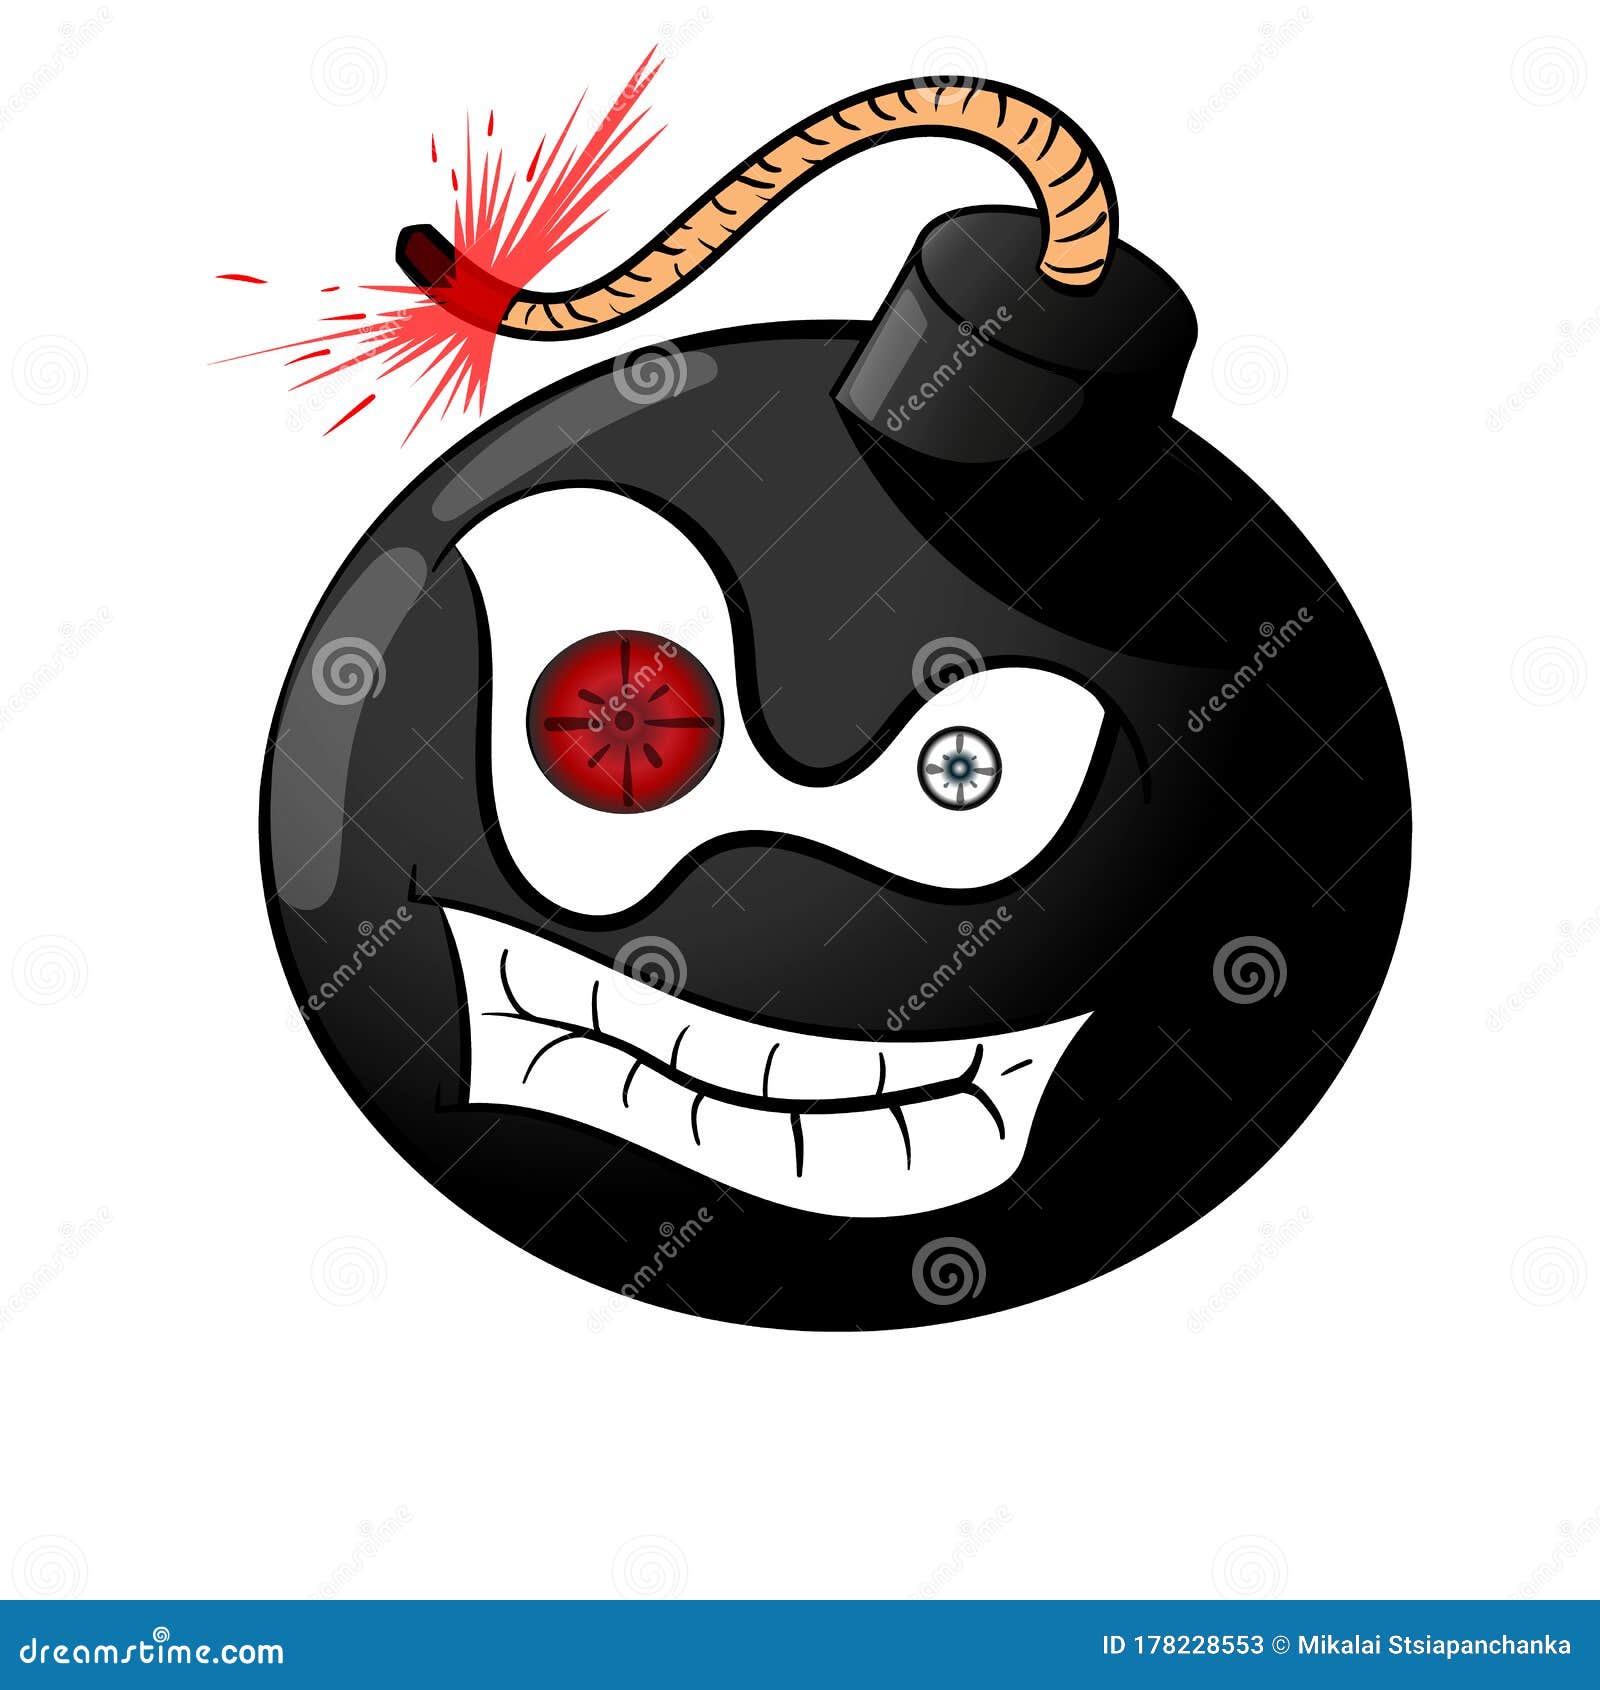 Cartoon Black Crazy Bomb Icon about To Explode with Burning Wick Stock ...